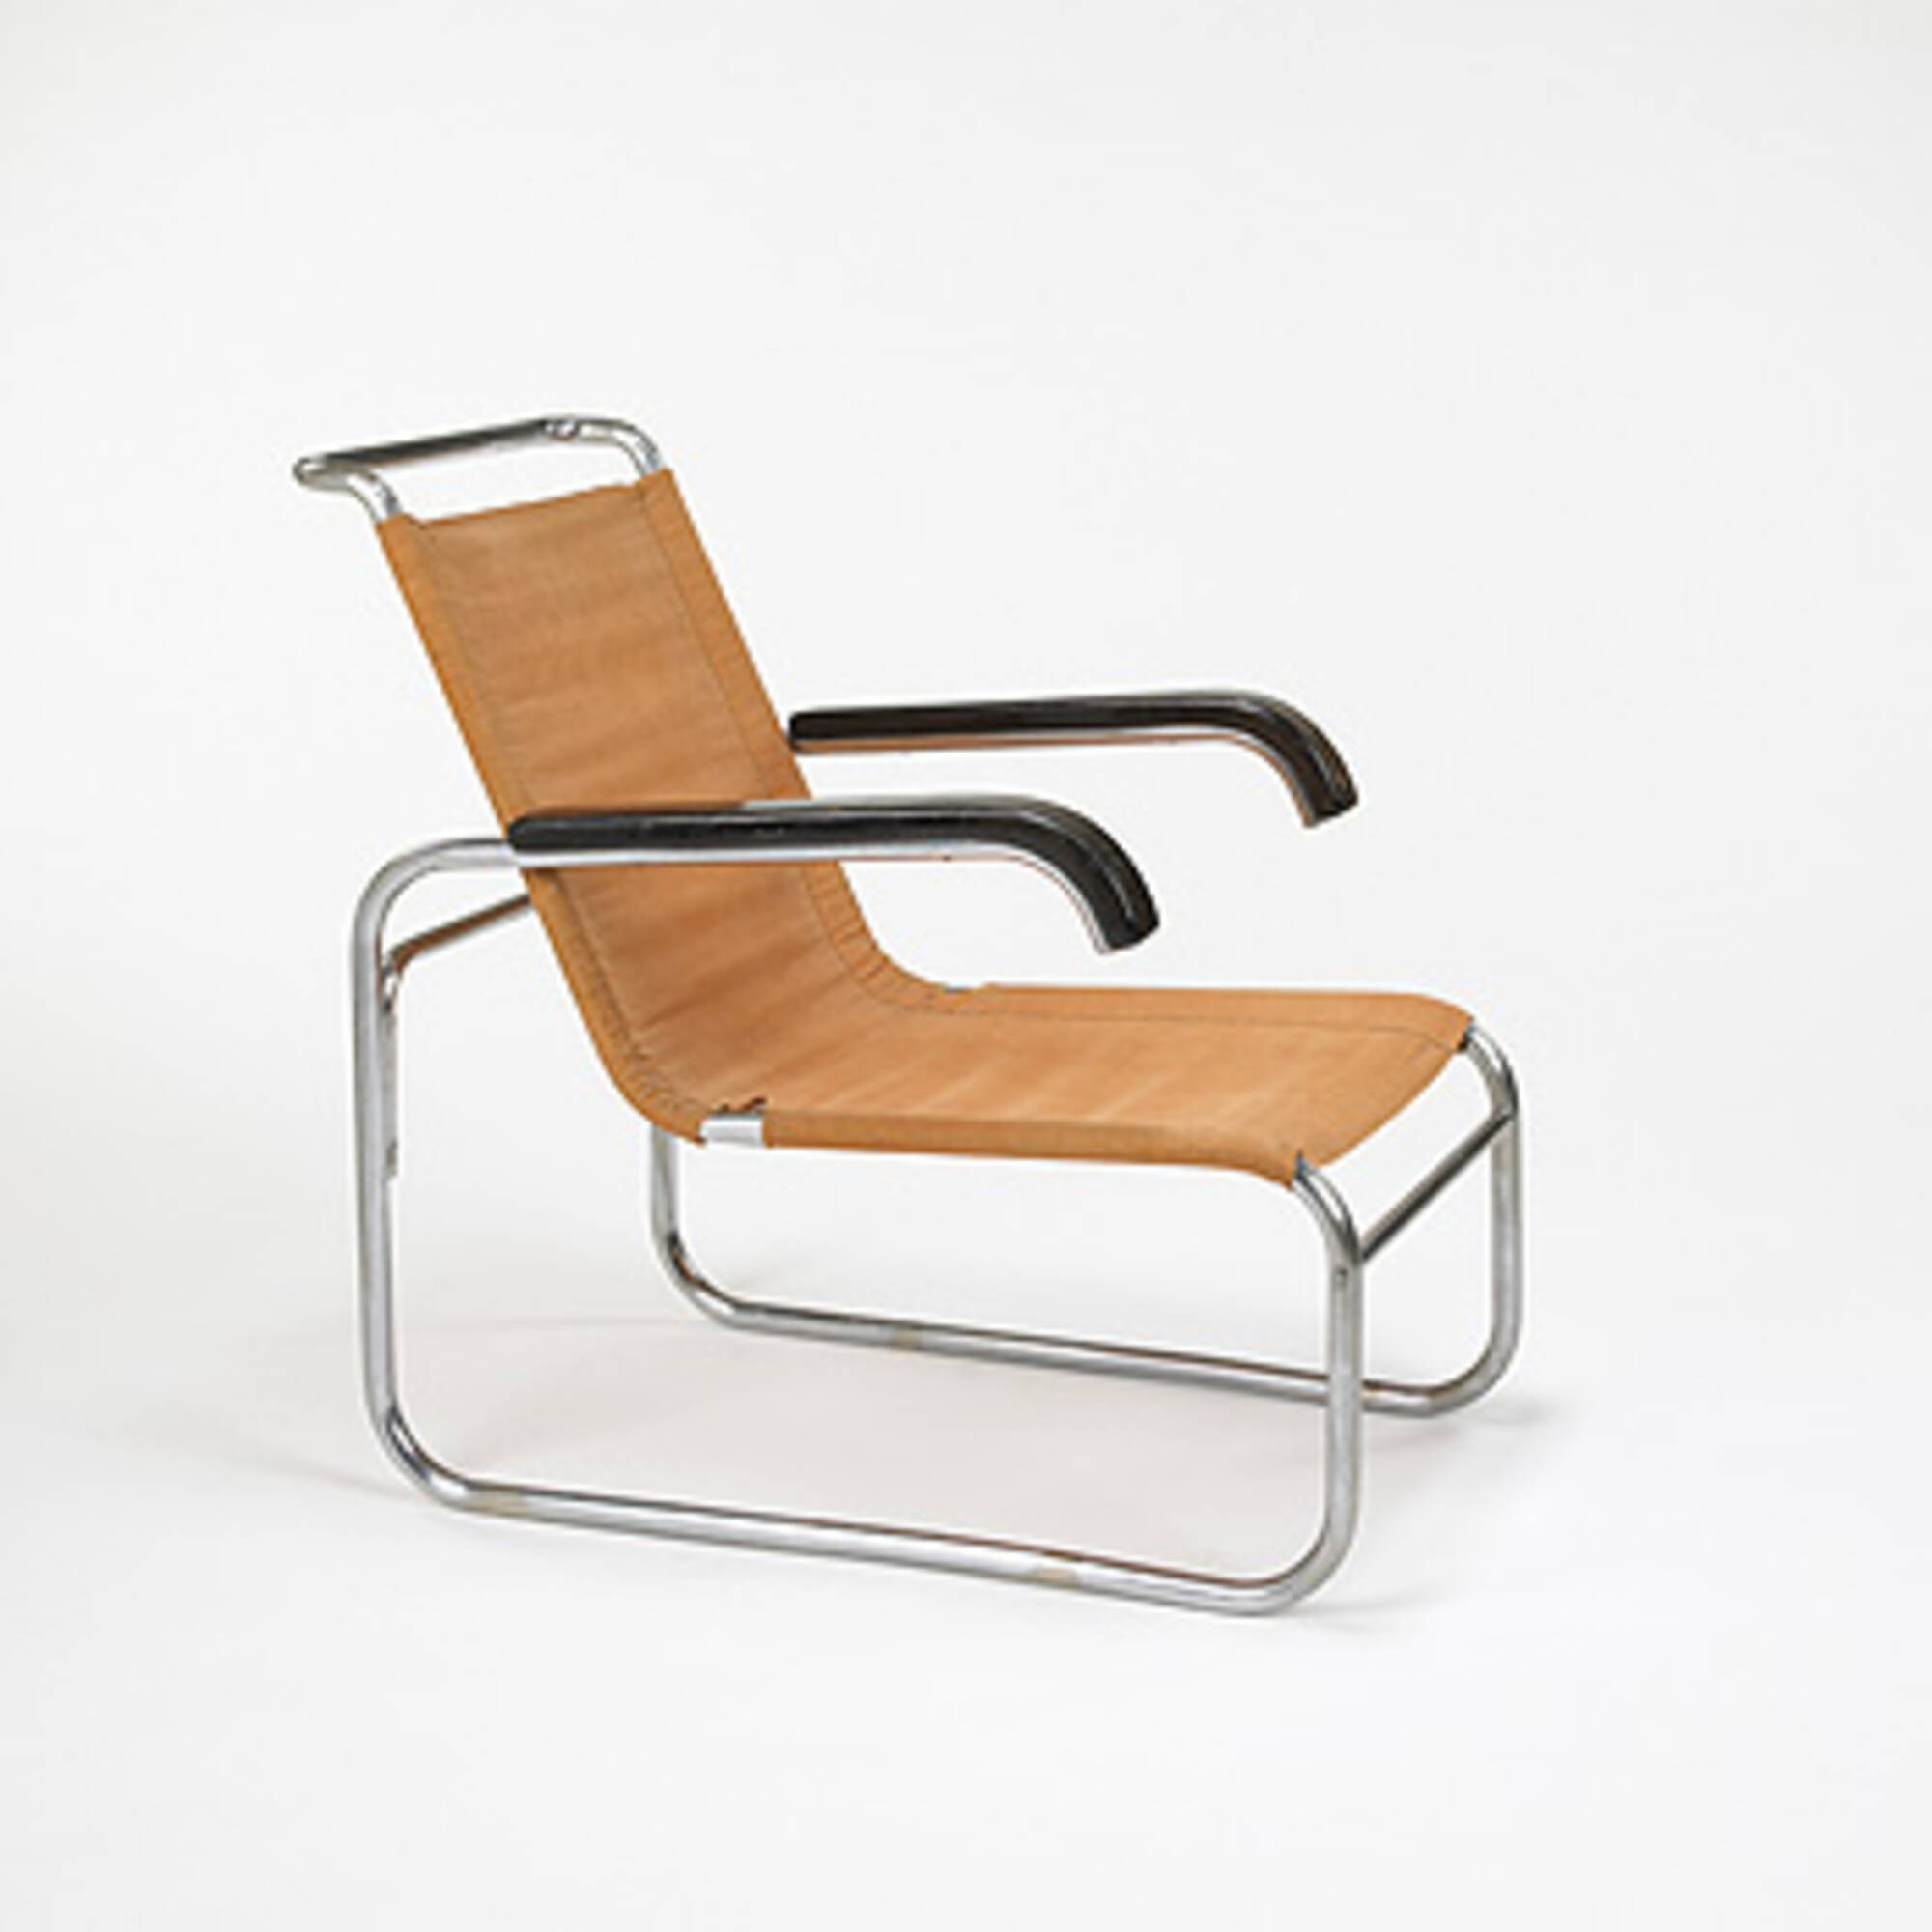 garage wacht delicatesse 130: MARCEL BREUER, lounge chair, model #B35 < Important 20th Century  Design, 25 September 2005 < Auctions | Wright: Auctions of Art and Design